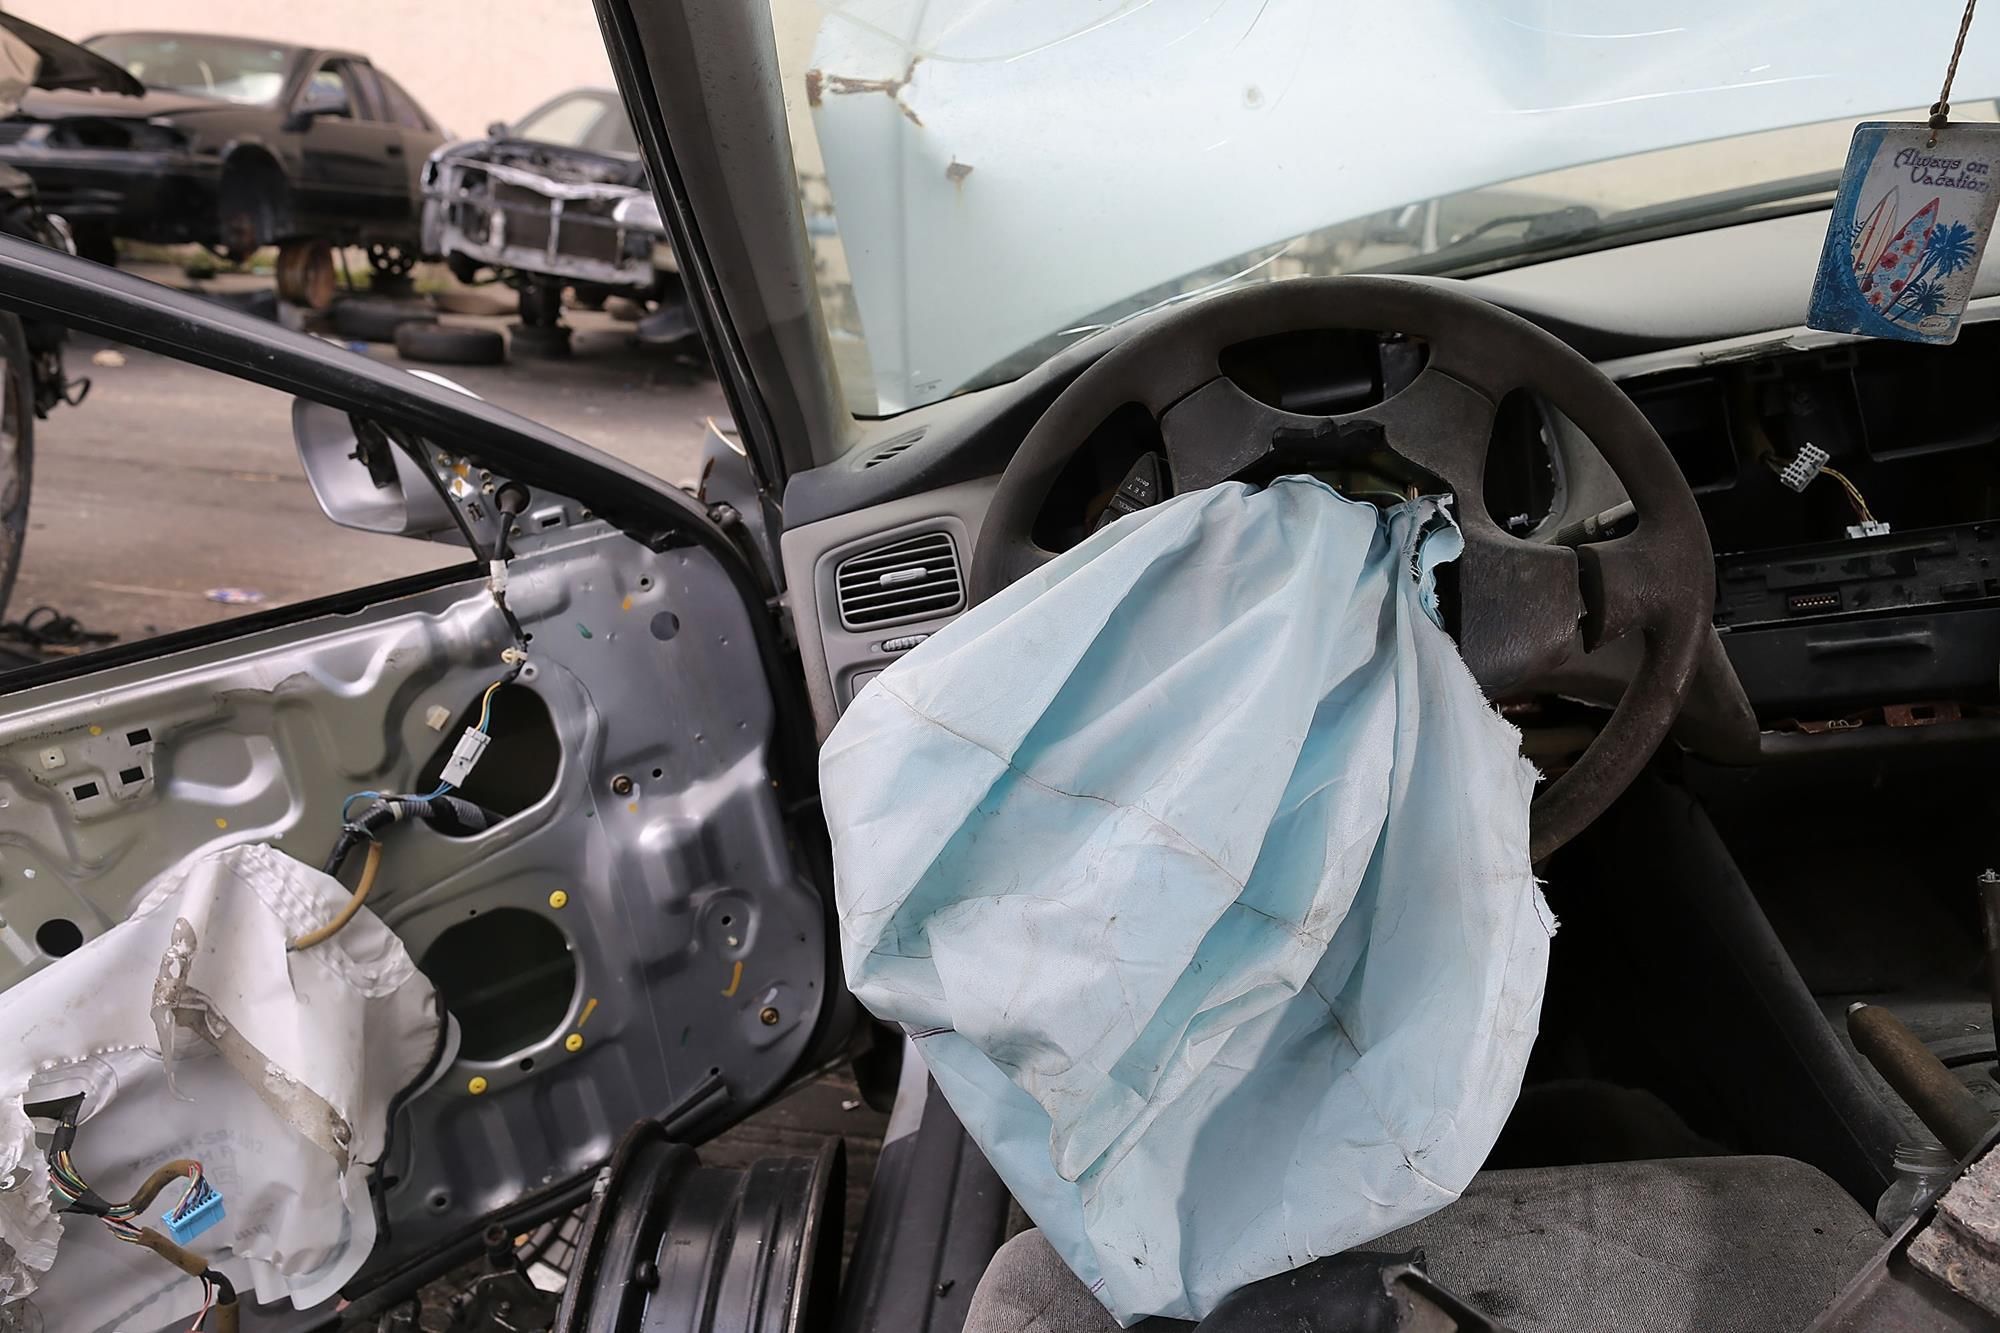 pickup truck issues with airbags